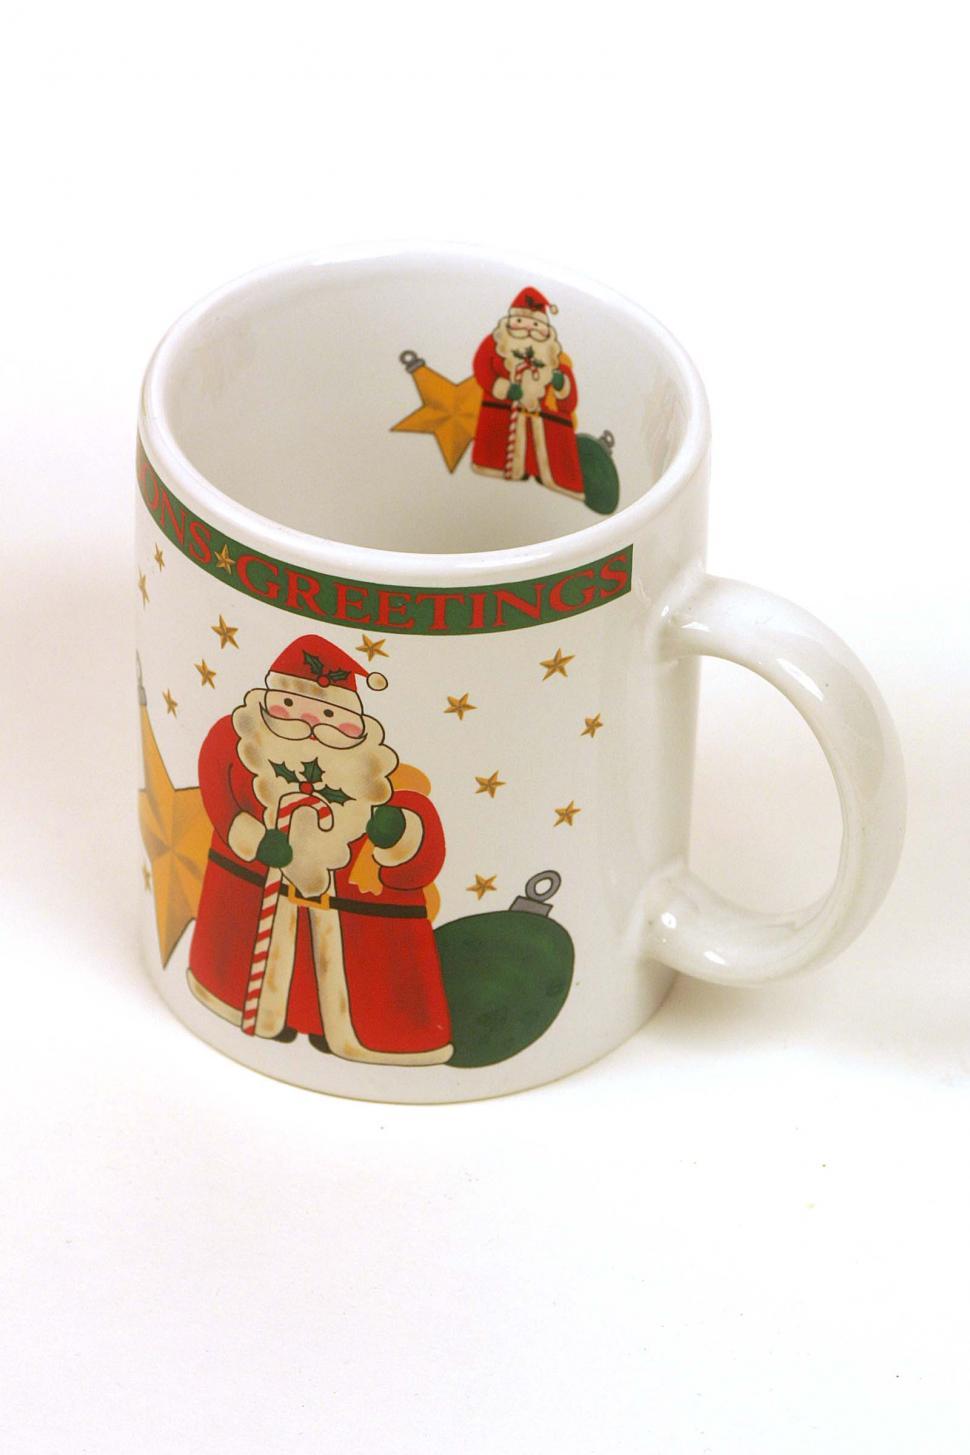 Free Image of Santa Claus Coffee Cup 